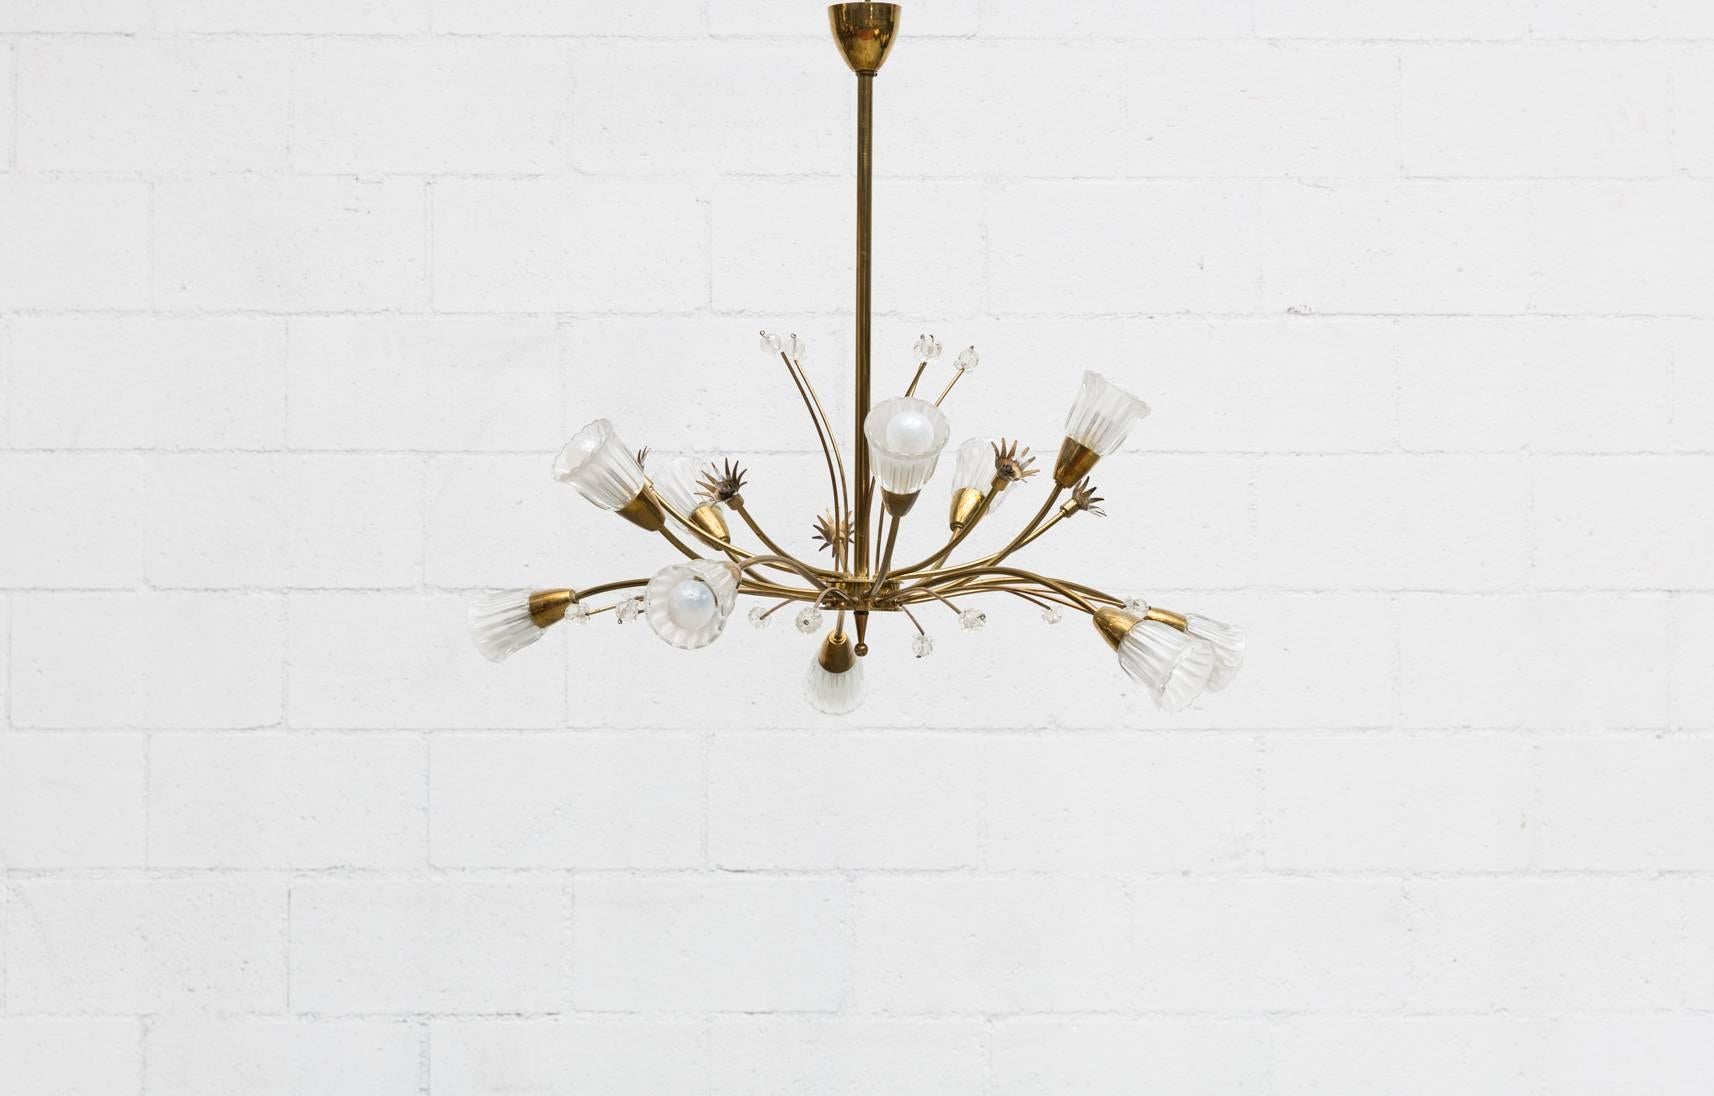 Hollywood Regency style brass floral spray chandelier with heavy pressed glass shades. Mini brass floral sprays have miniature light bulbs, some are missing. Original condition. Brass shows some discoloration and visible patina.